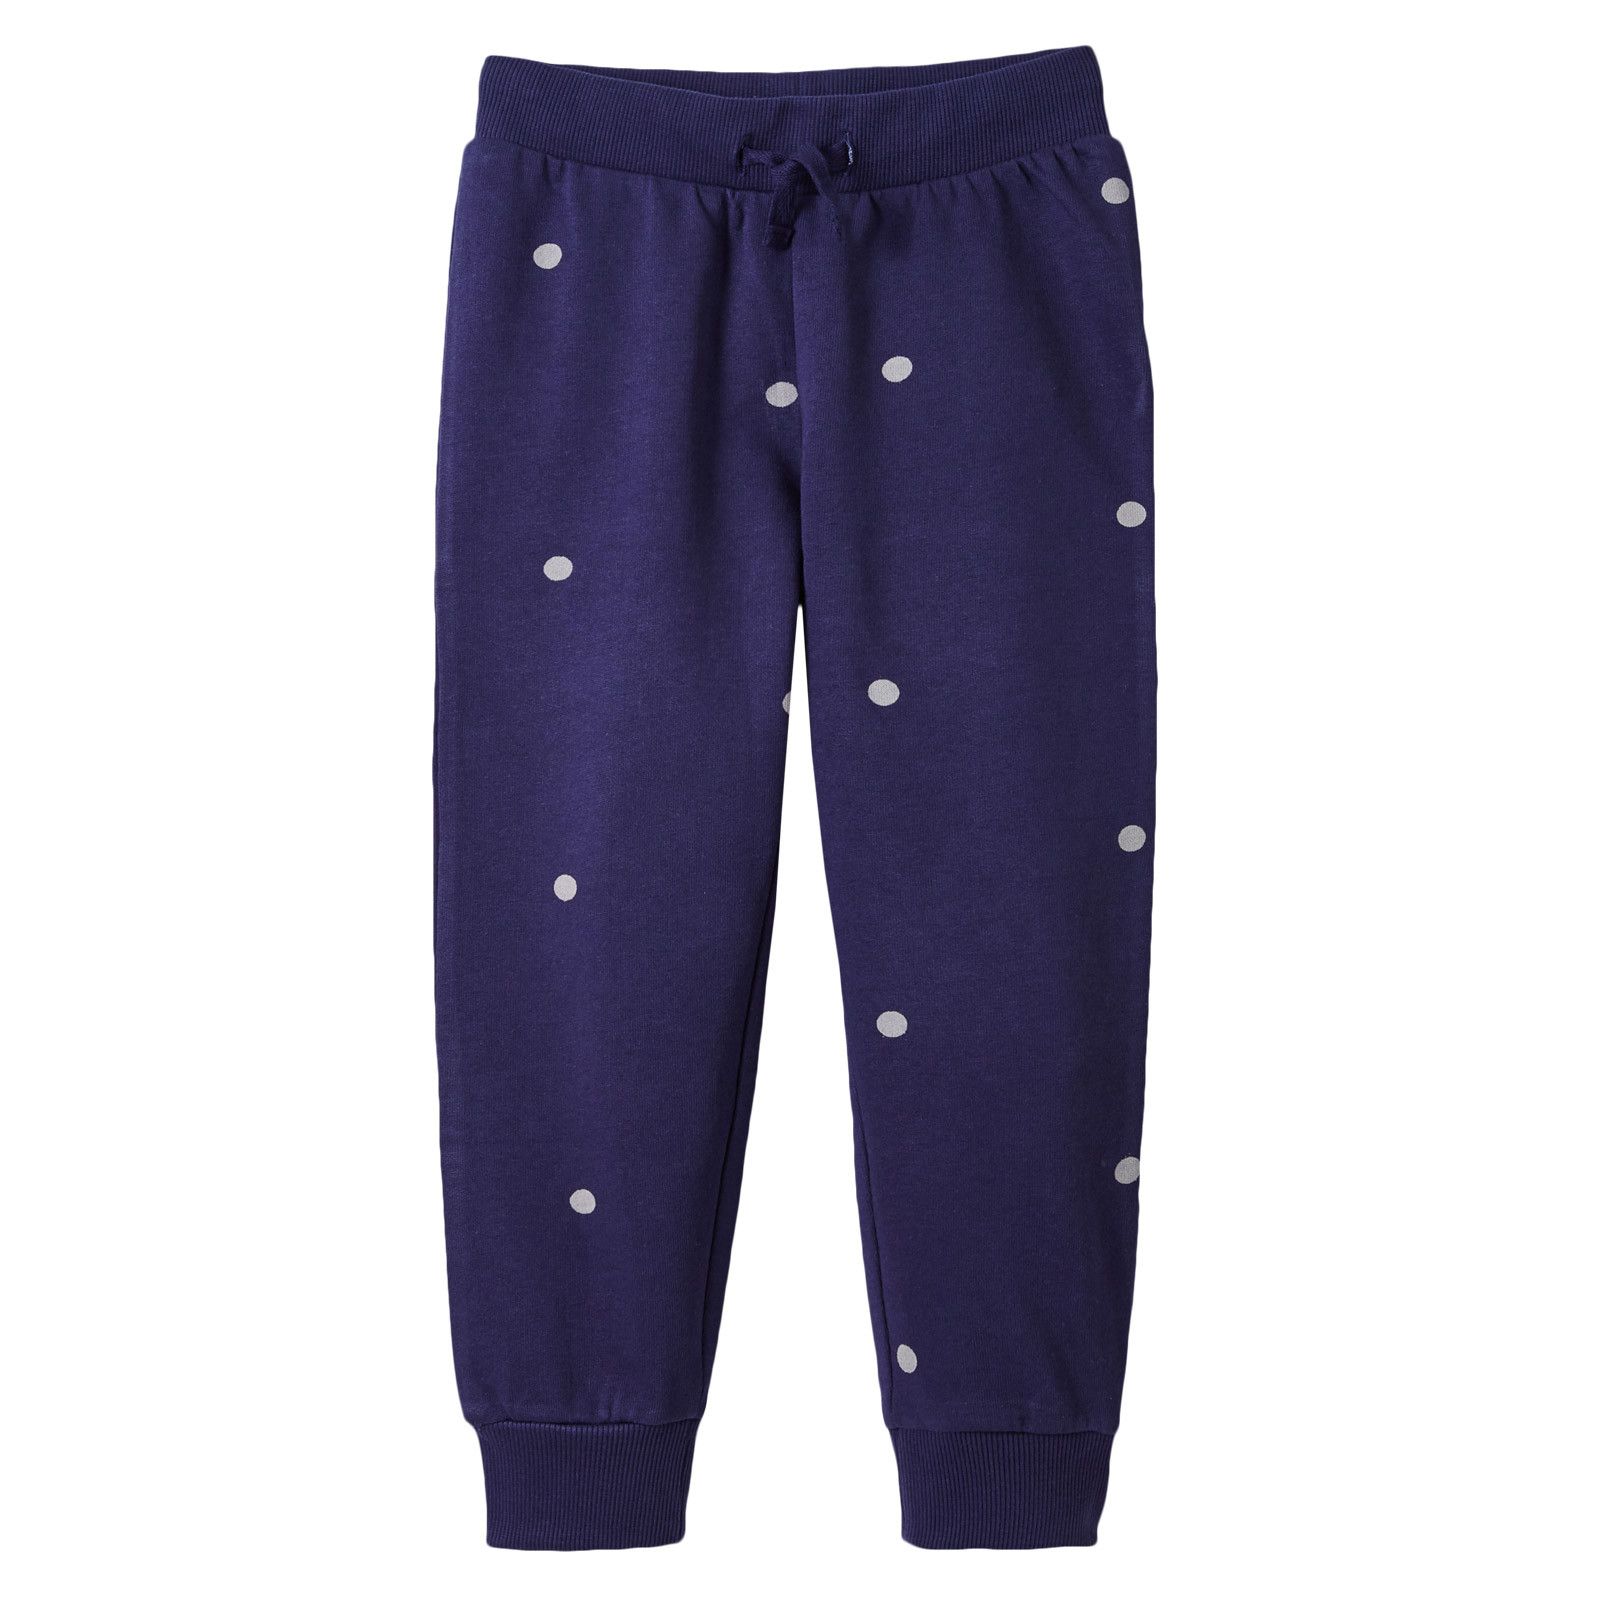 Boys&Girls Navy Blue Trouses With White Speck - CÉMAROSE | Children's Fashion Store - 1